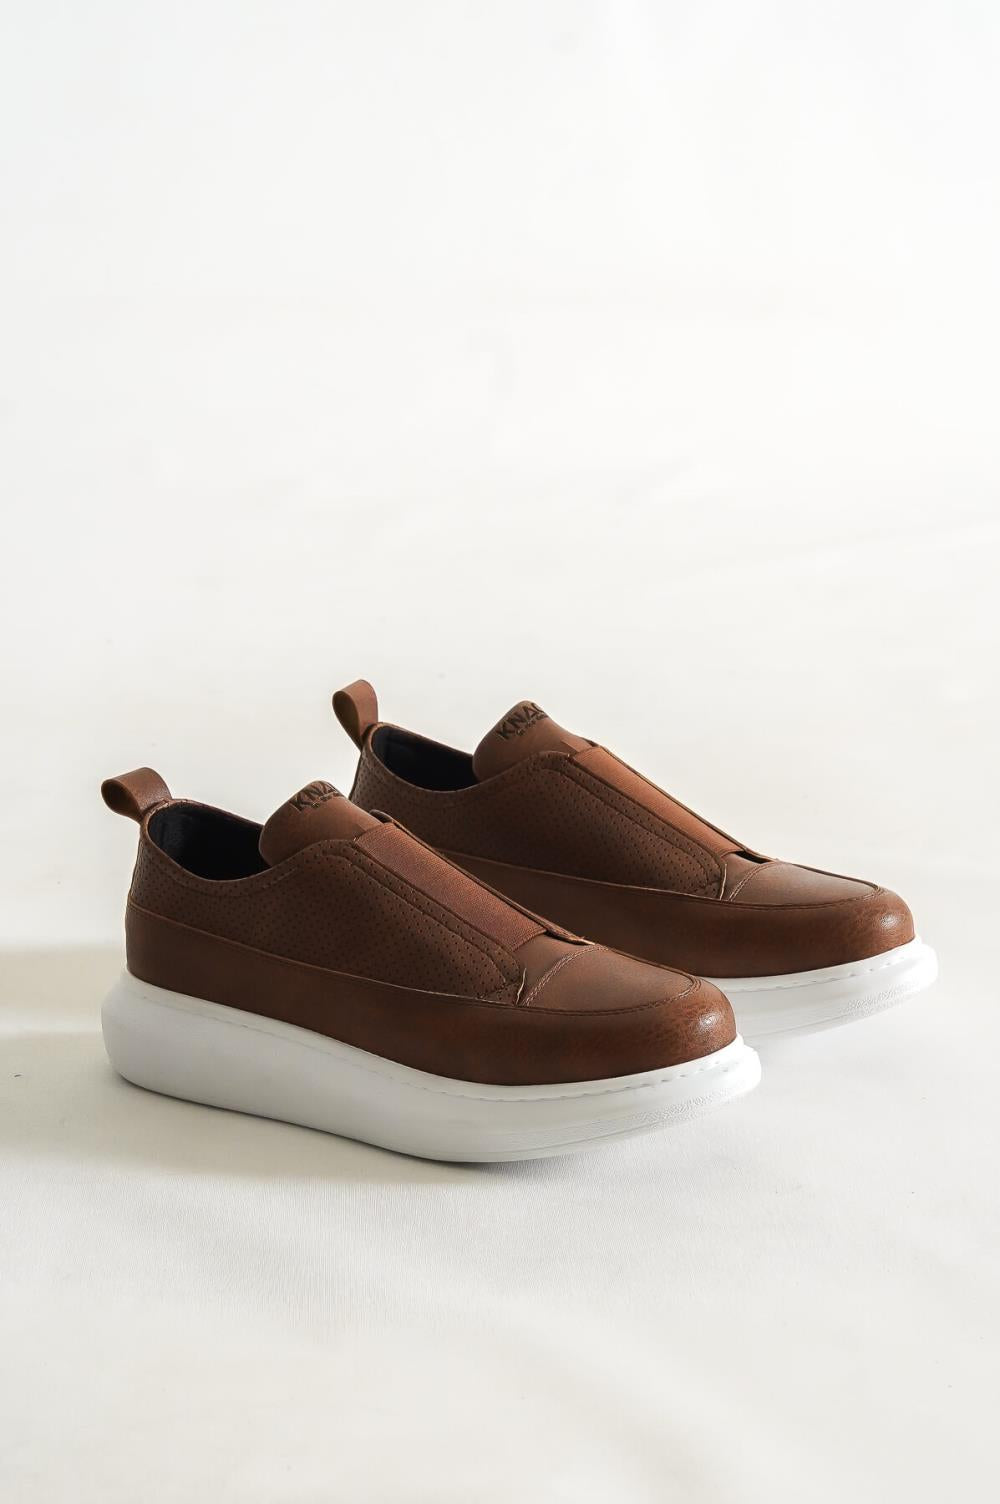 STM Design Sneakers Shoes 911 Tan - STREETMODE™